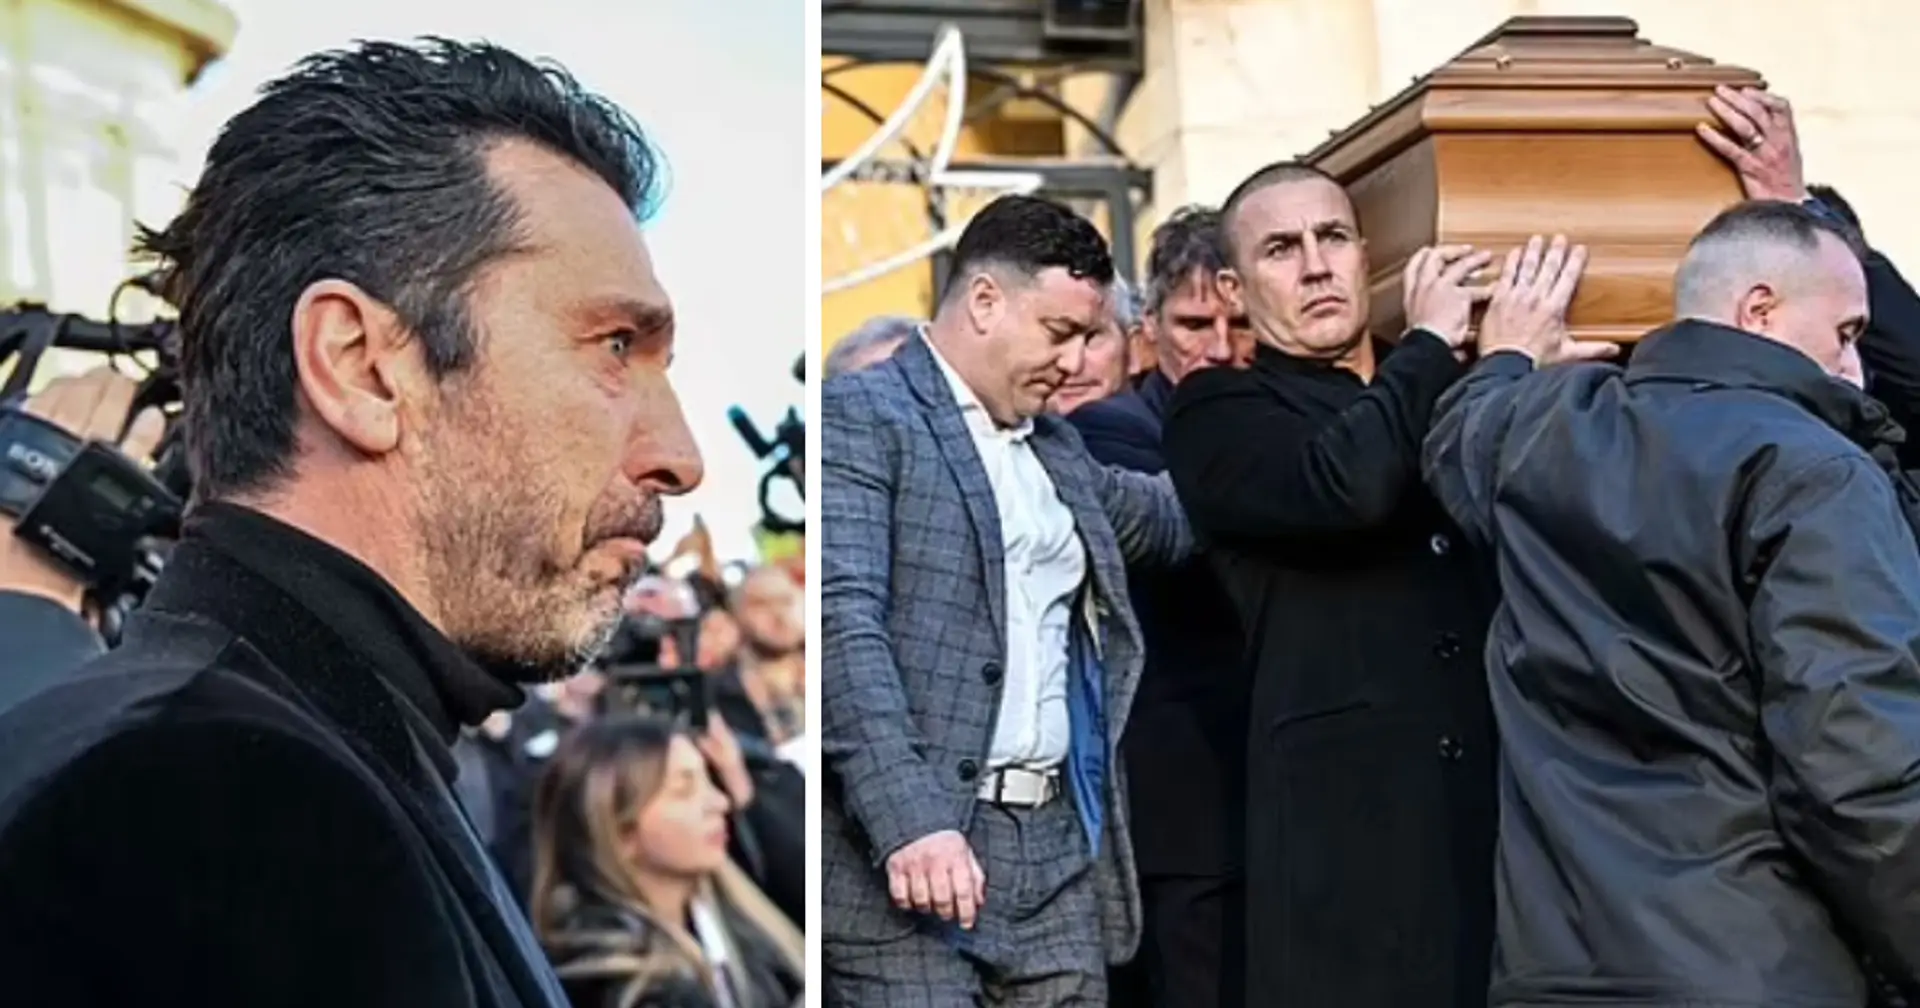 Gianluigi Buffon bursts into tears as 30,000 people gather to pay respect to the nation's greatest goalscorer Gigi Riva